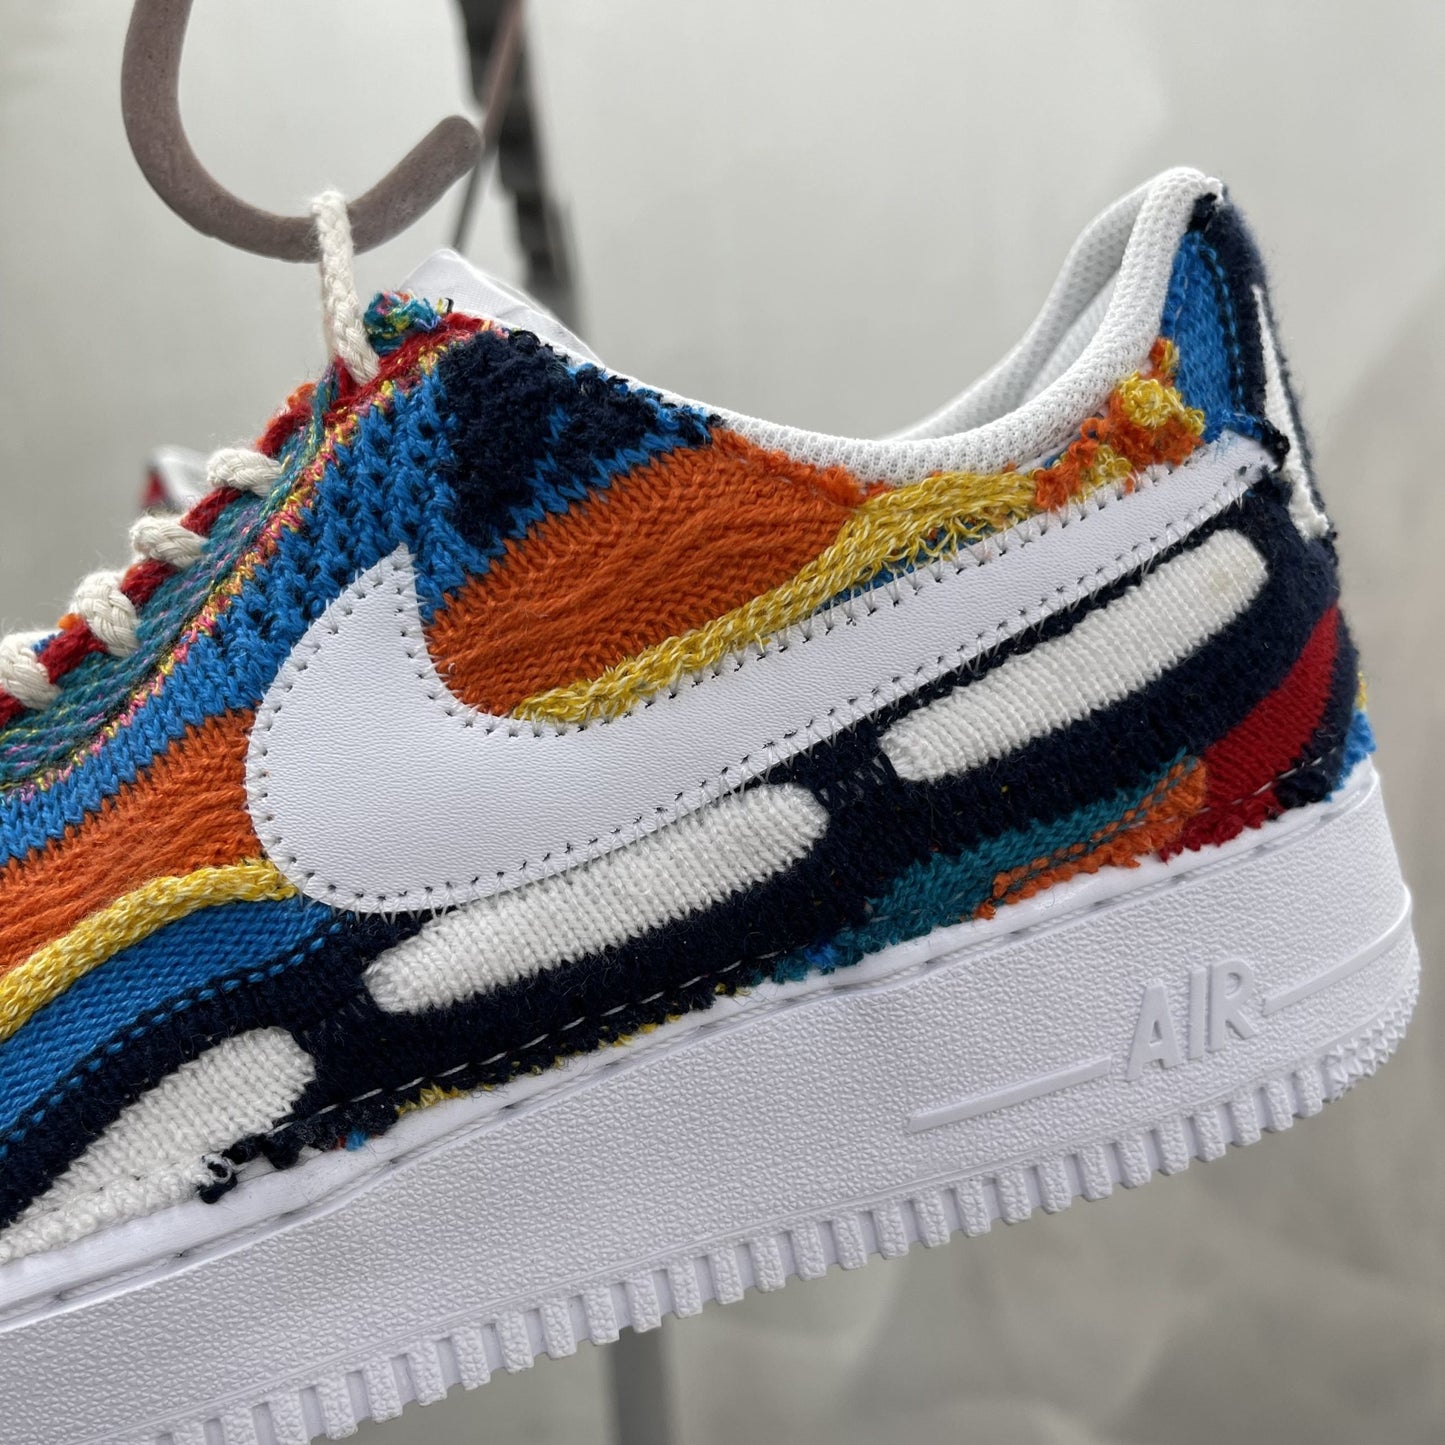 Custom AIR FORCE 1 - Carlo Colucci full (very limited)